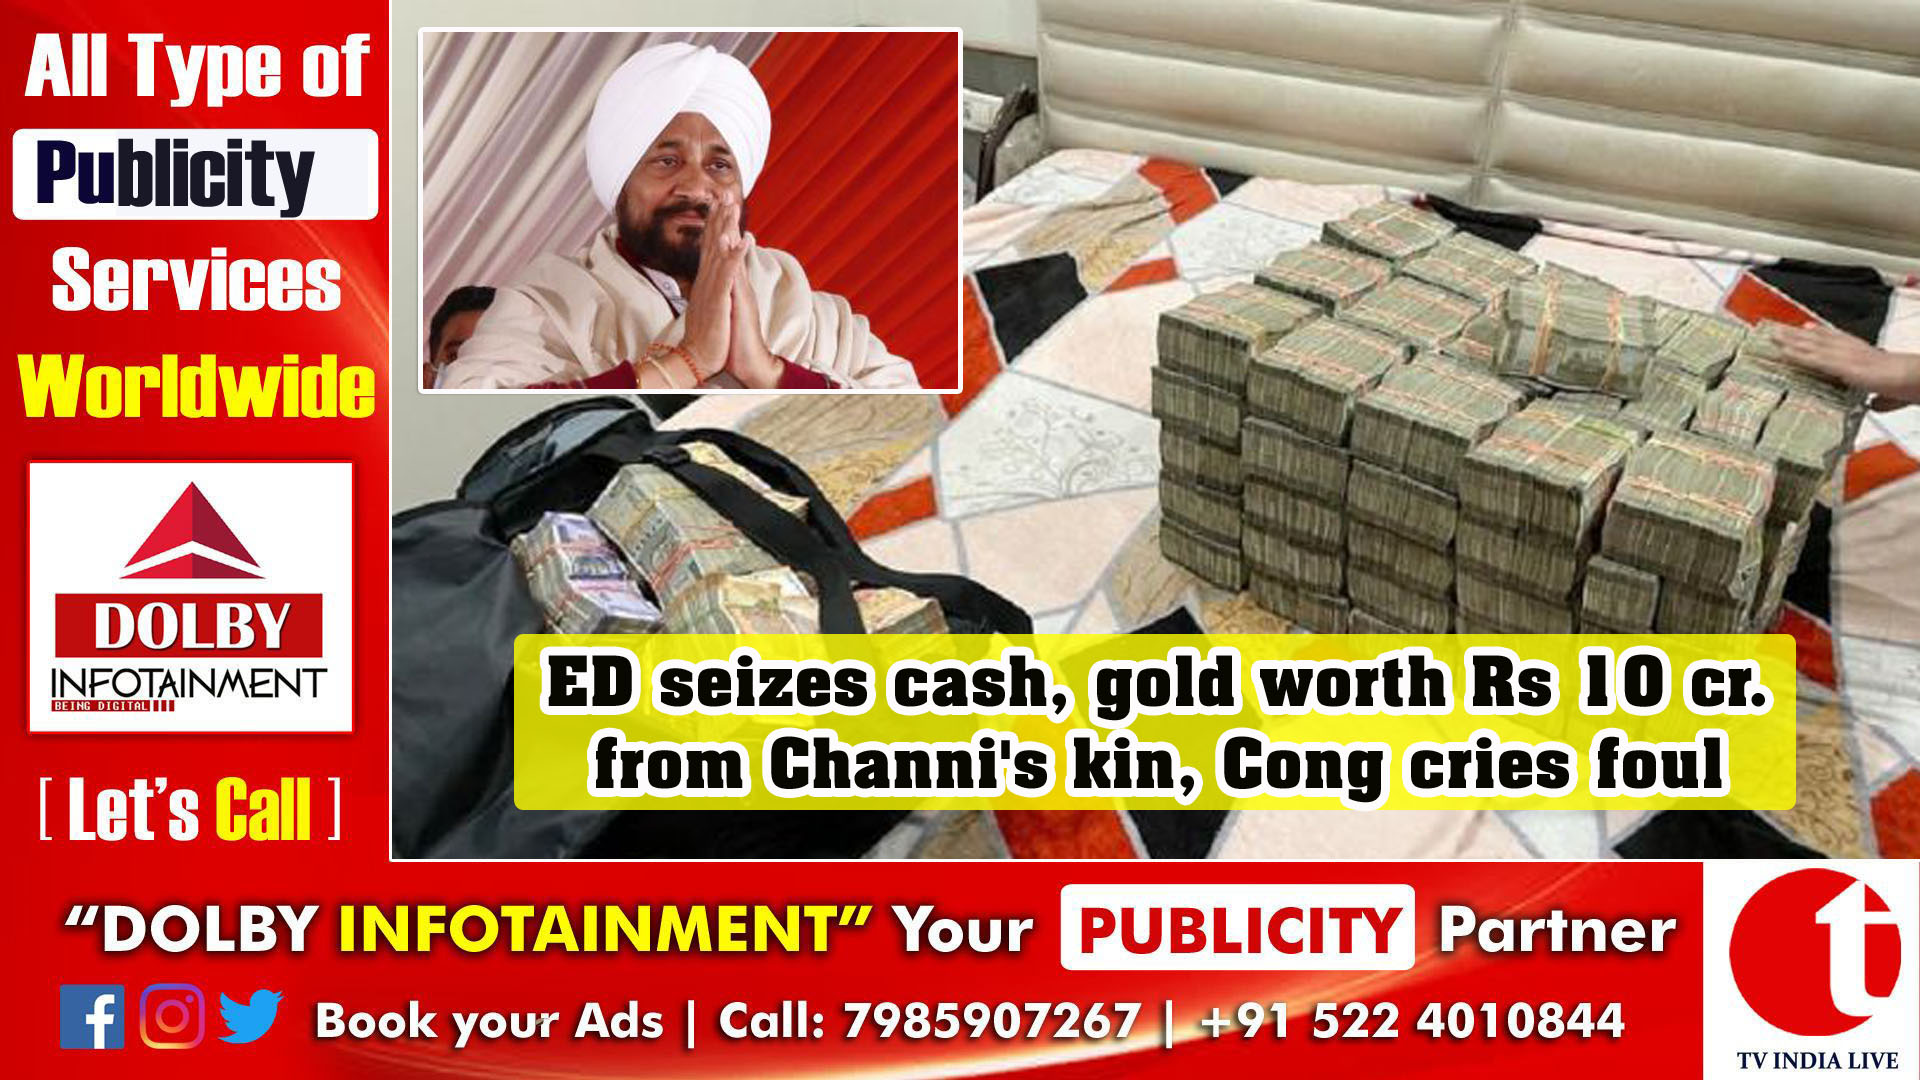 ED seizes cash, gold worth Rs 10 cr. from Channi's kin, Cong cries foul